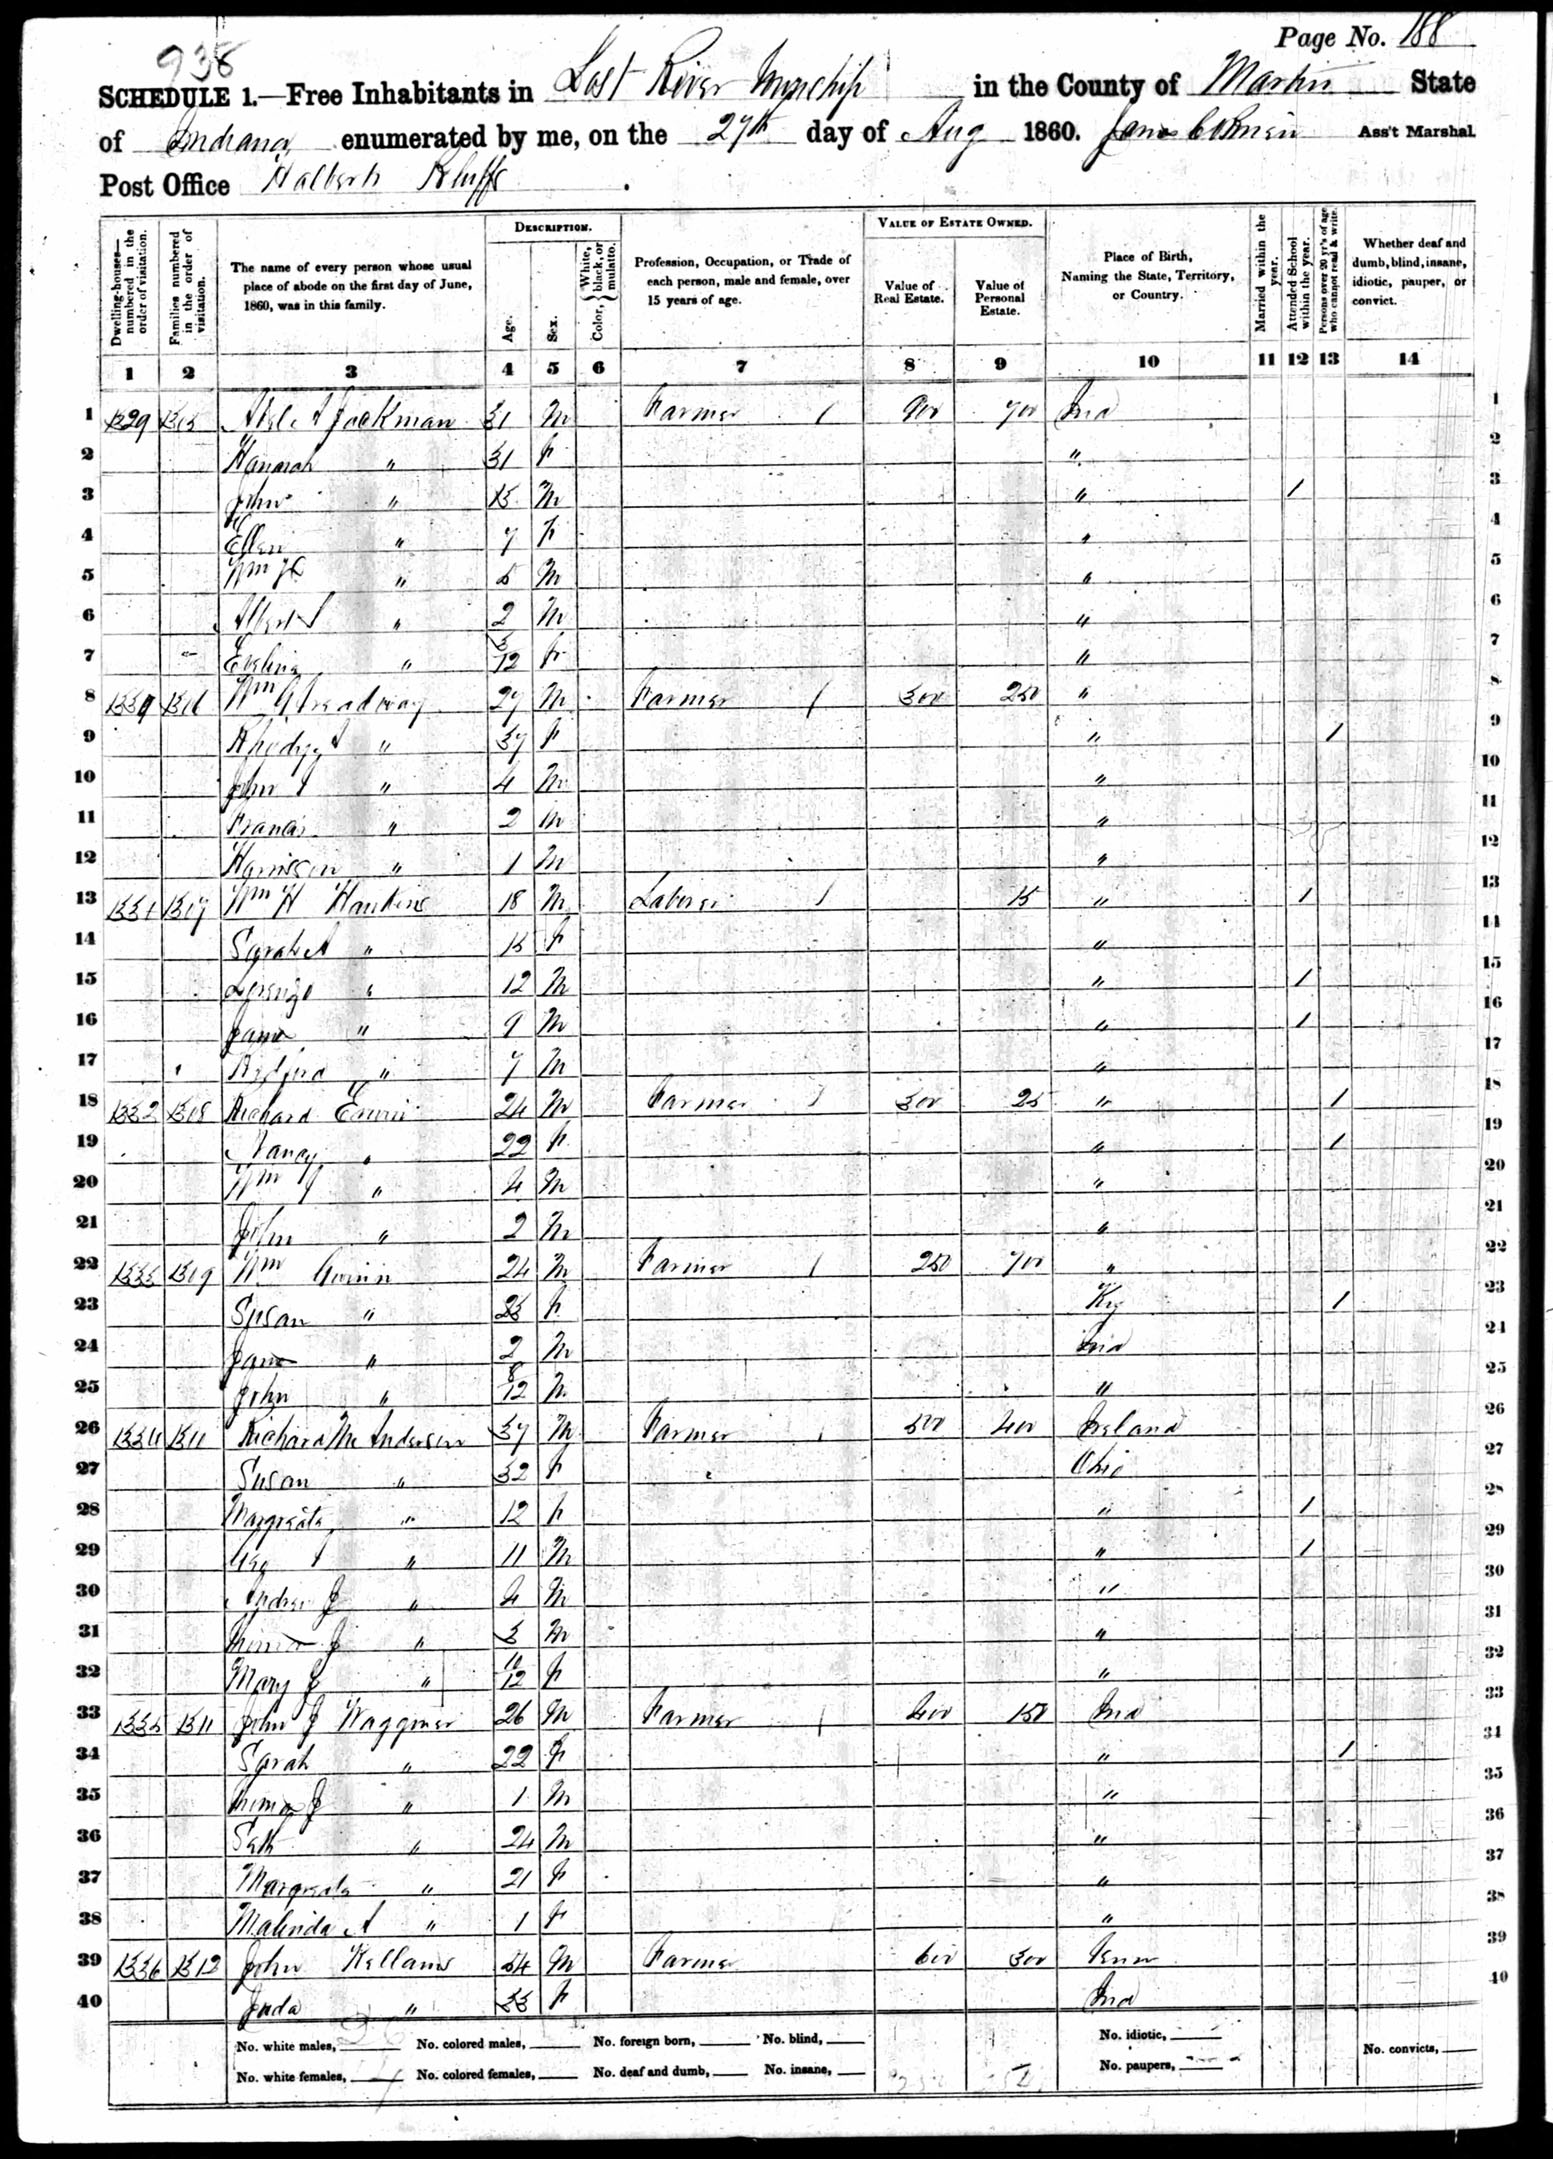 1860 Lost River Township, Martin County, Indiana Census Sheet